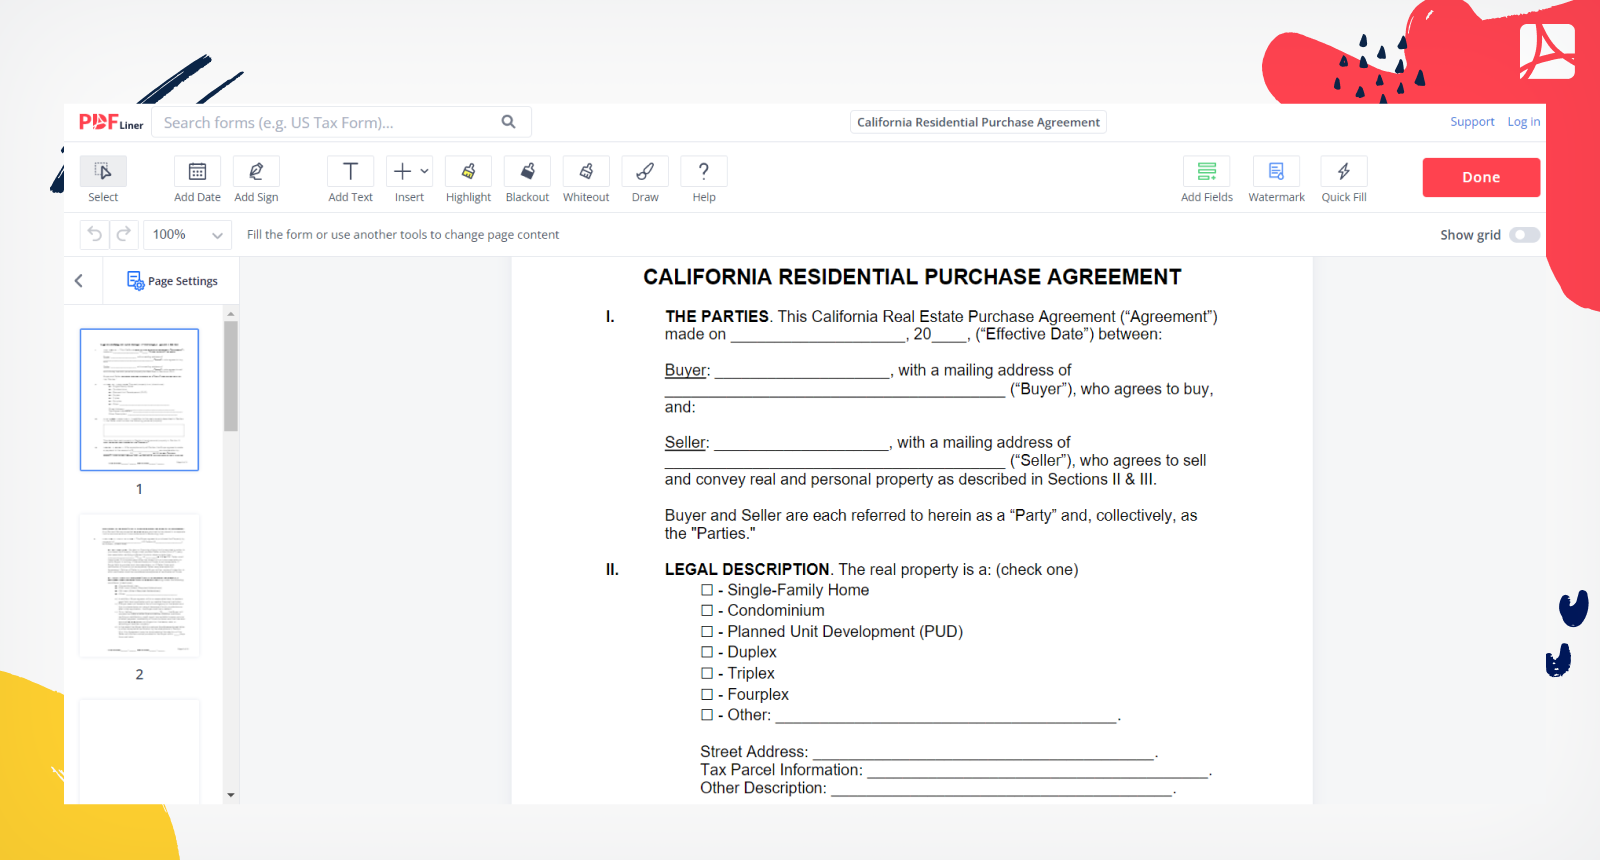 California Residential Purchase Agreement Form Screenshot